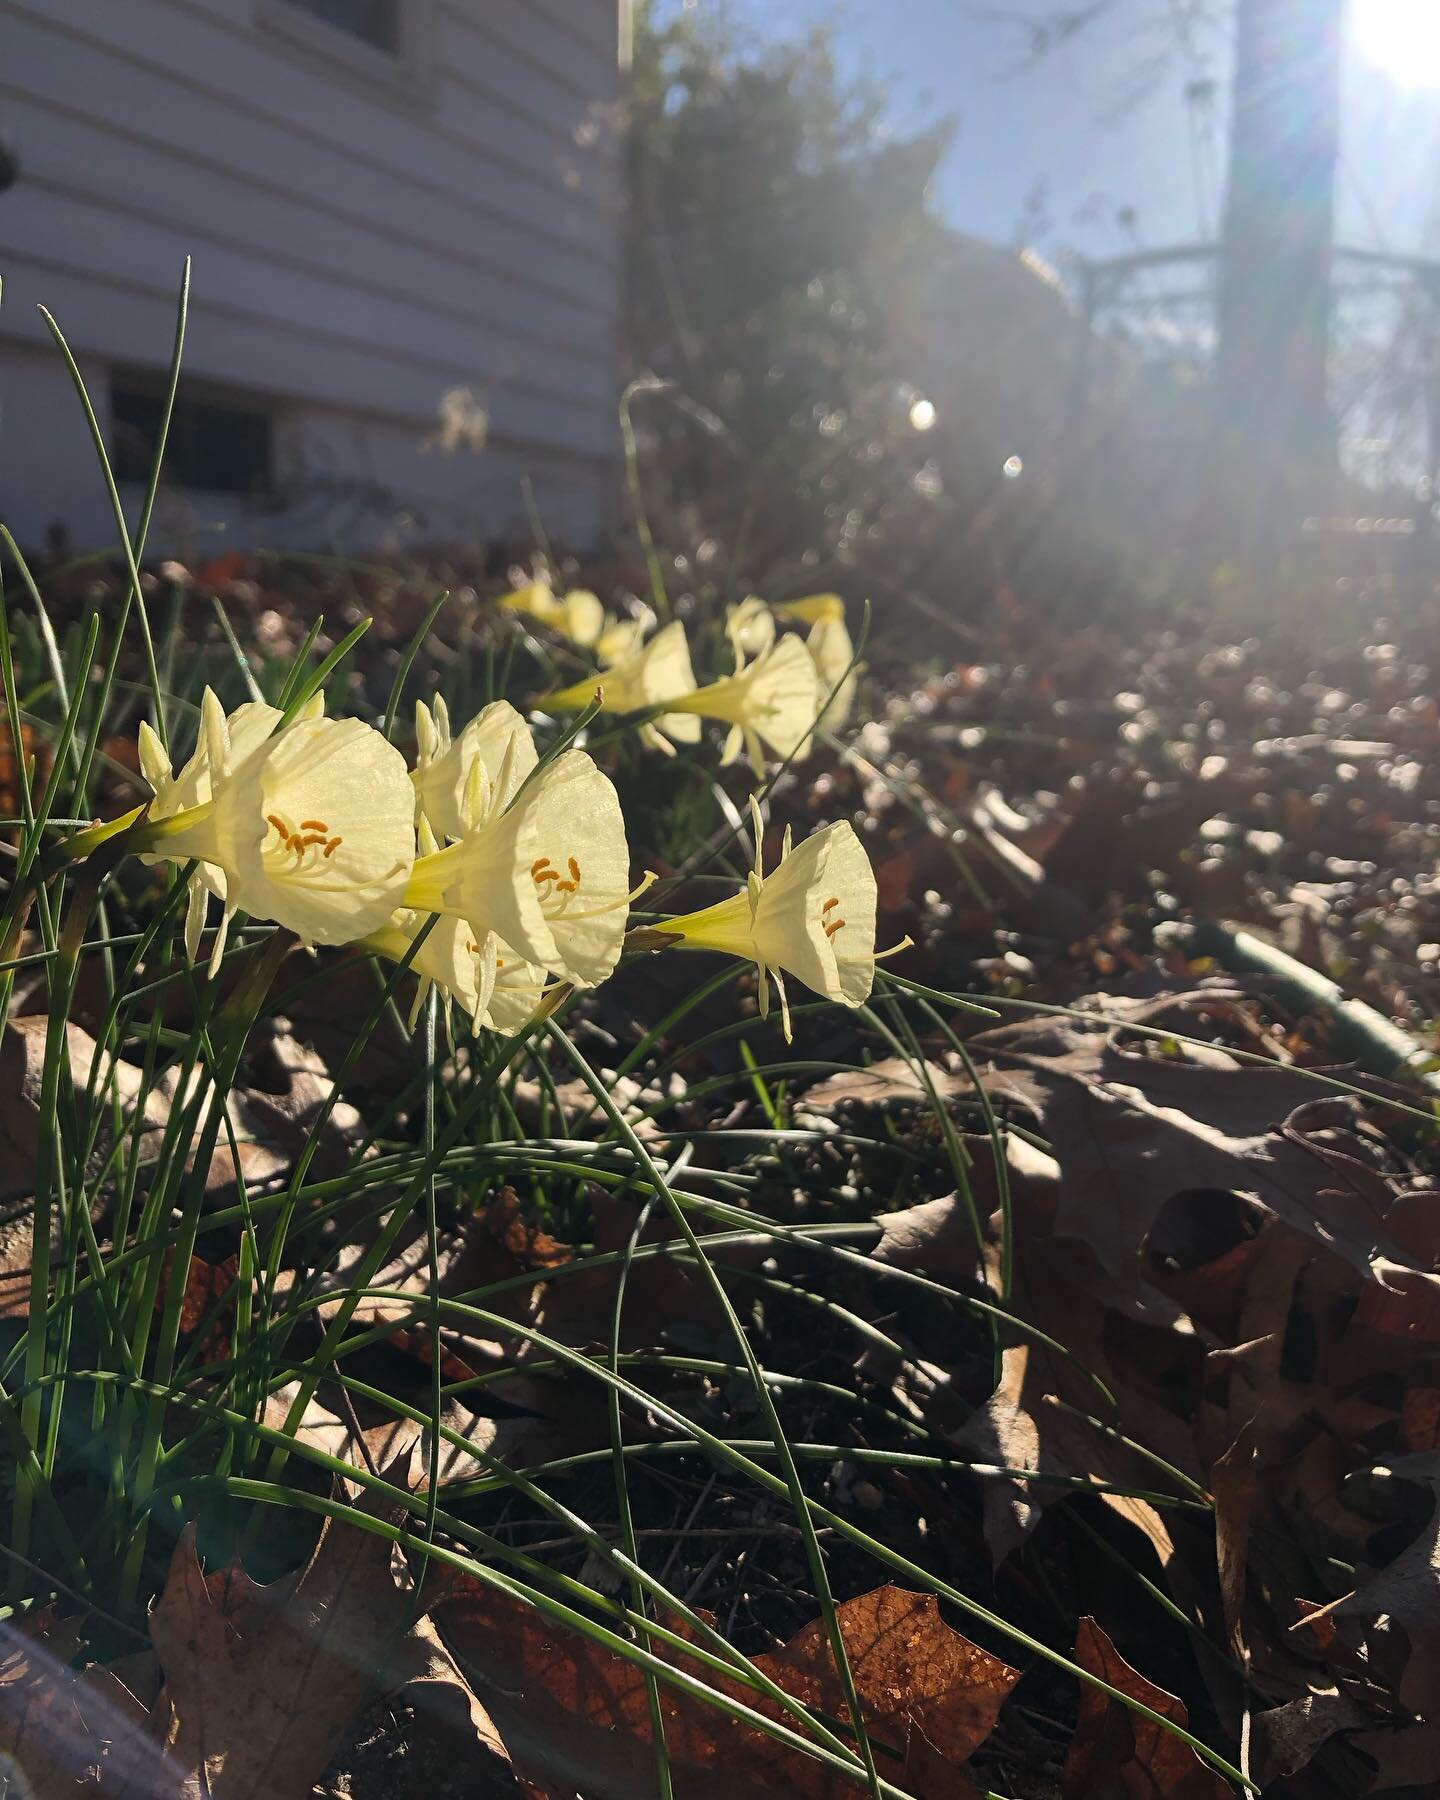 Welcoming the return of my little early spring friends. 
#daffodil #crocus #floweringquince